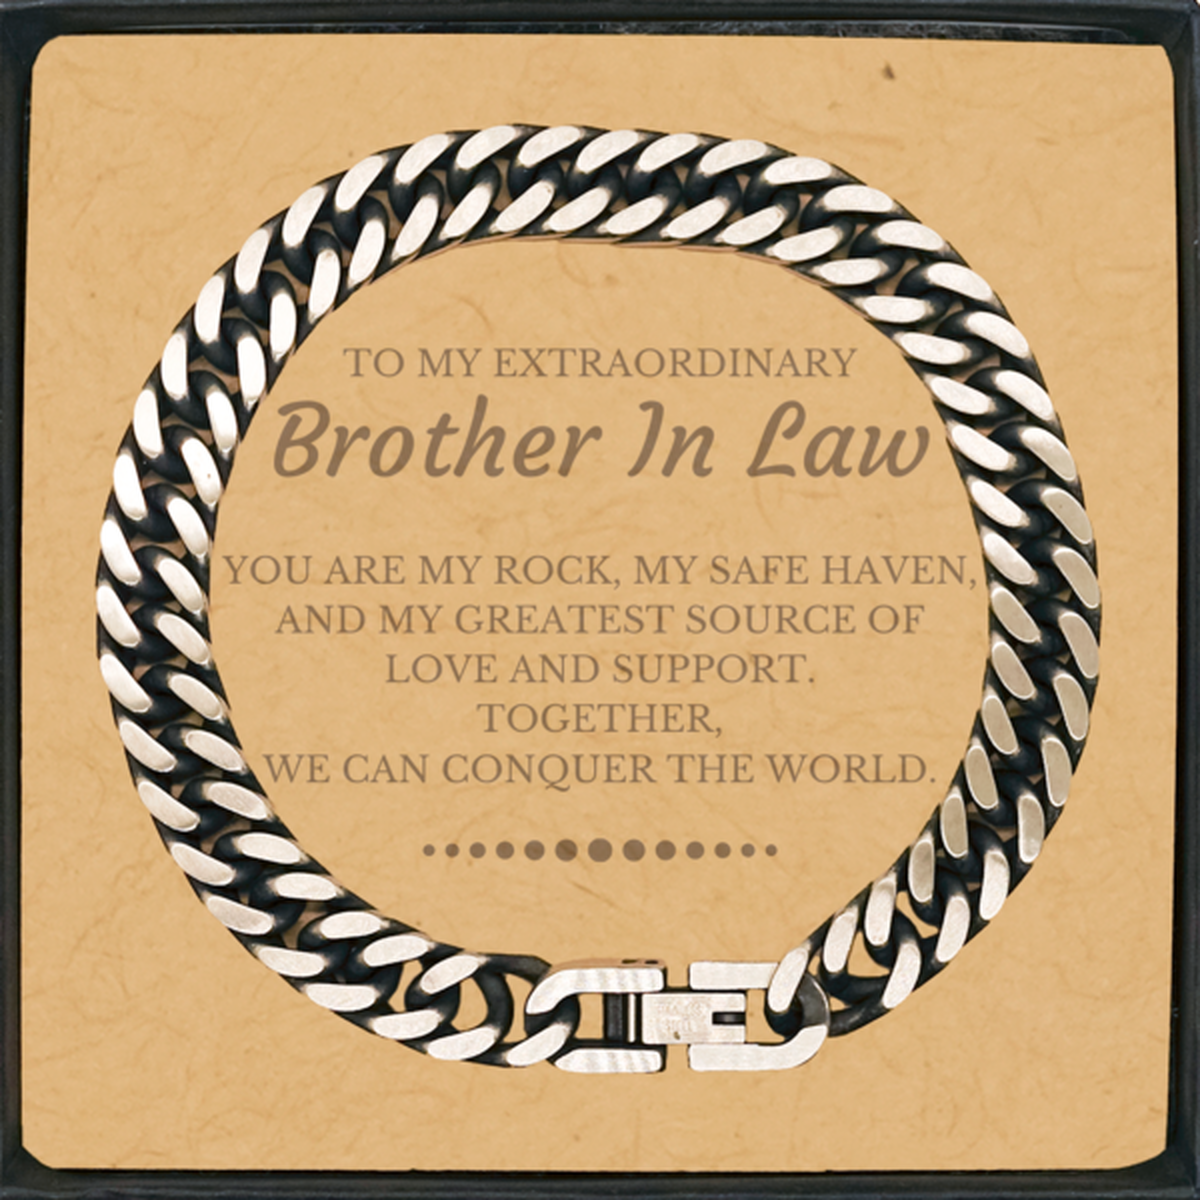 To My Extraordinary Brother In Law Gifts, Together, we can conquer the world, Birthday Cuban Link Chain Bracelet For Brother In Law, Christmas Gifts For Brother In Law